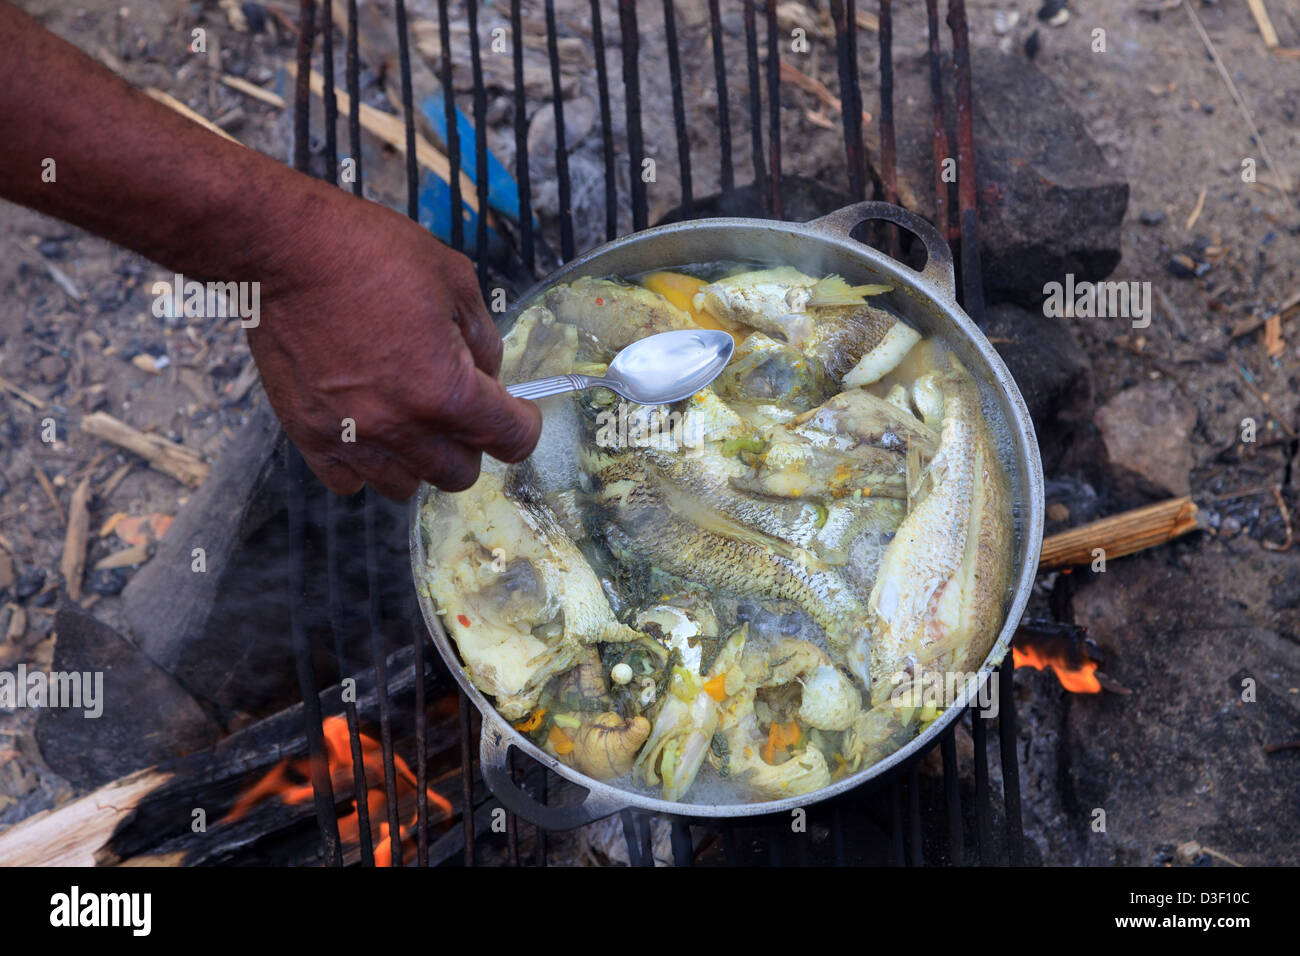 Traditional fish stew being prepared on an open fire by a fisherman at Micoud harbour, St Lucia Stock Photo